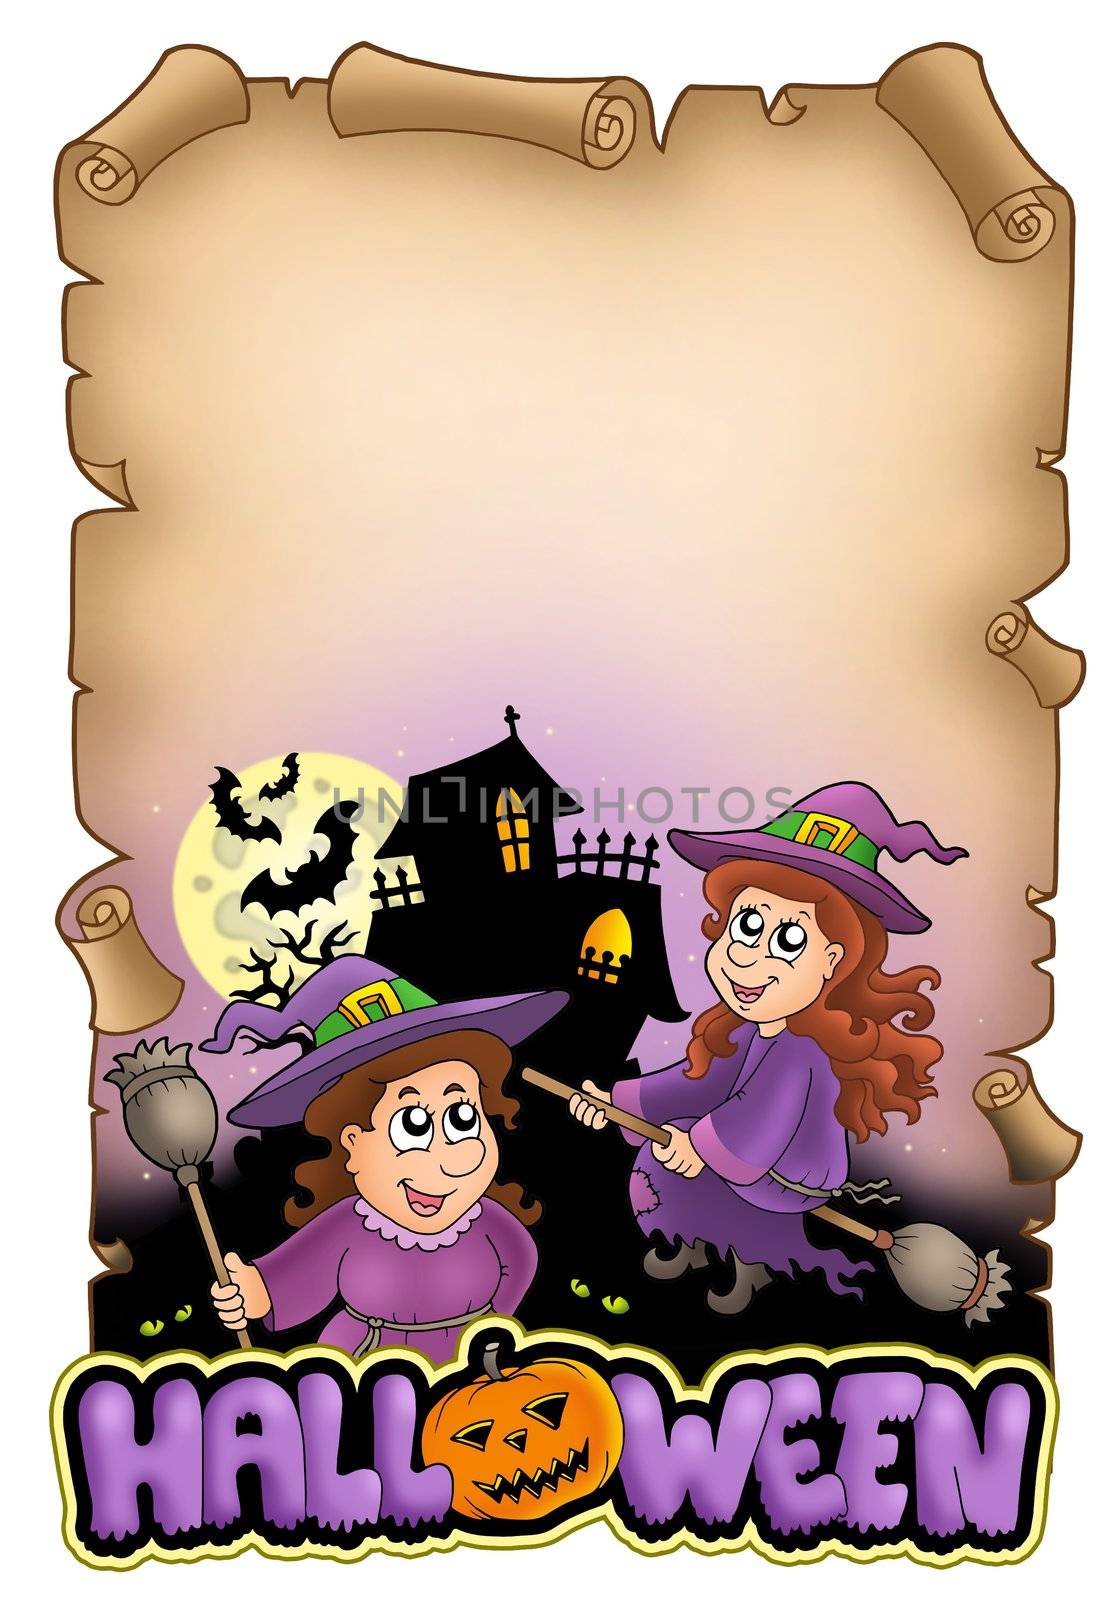 Parchment with Halloween theme 1 - color illustration.